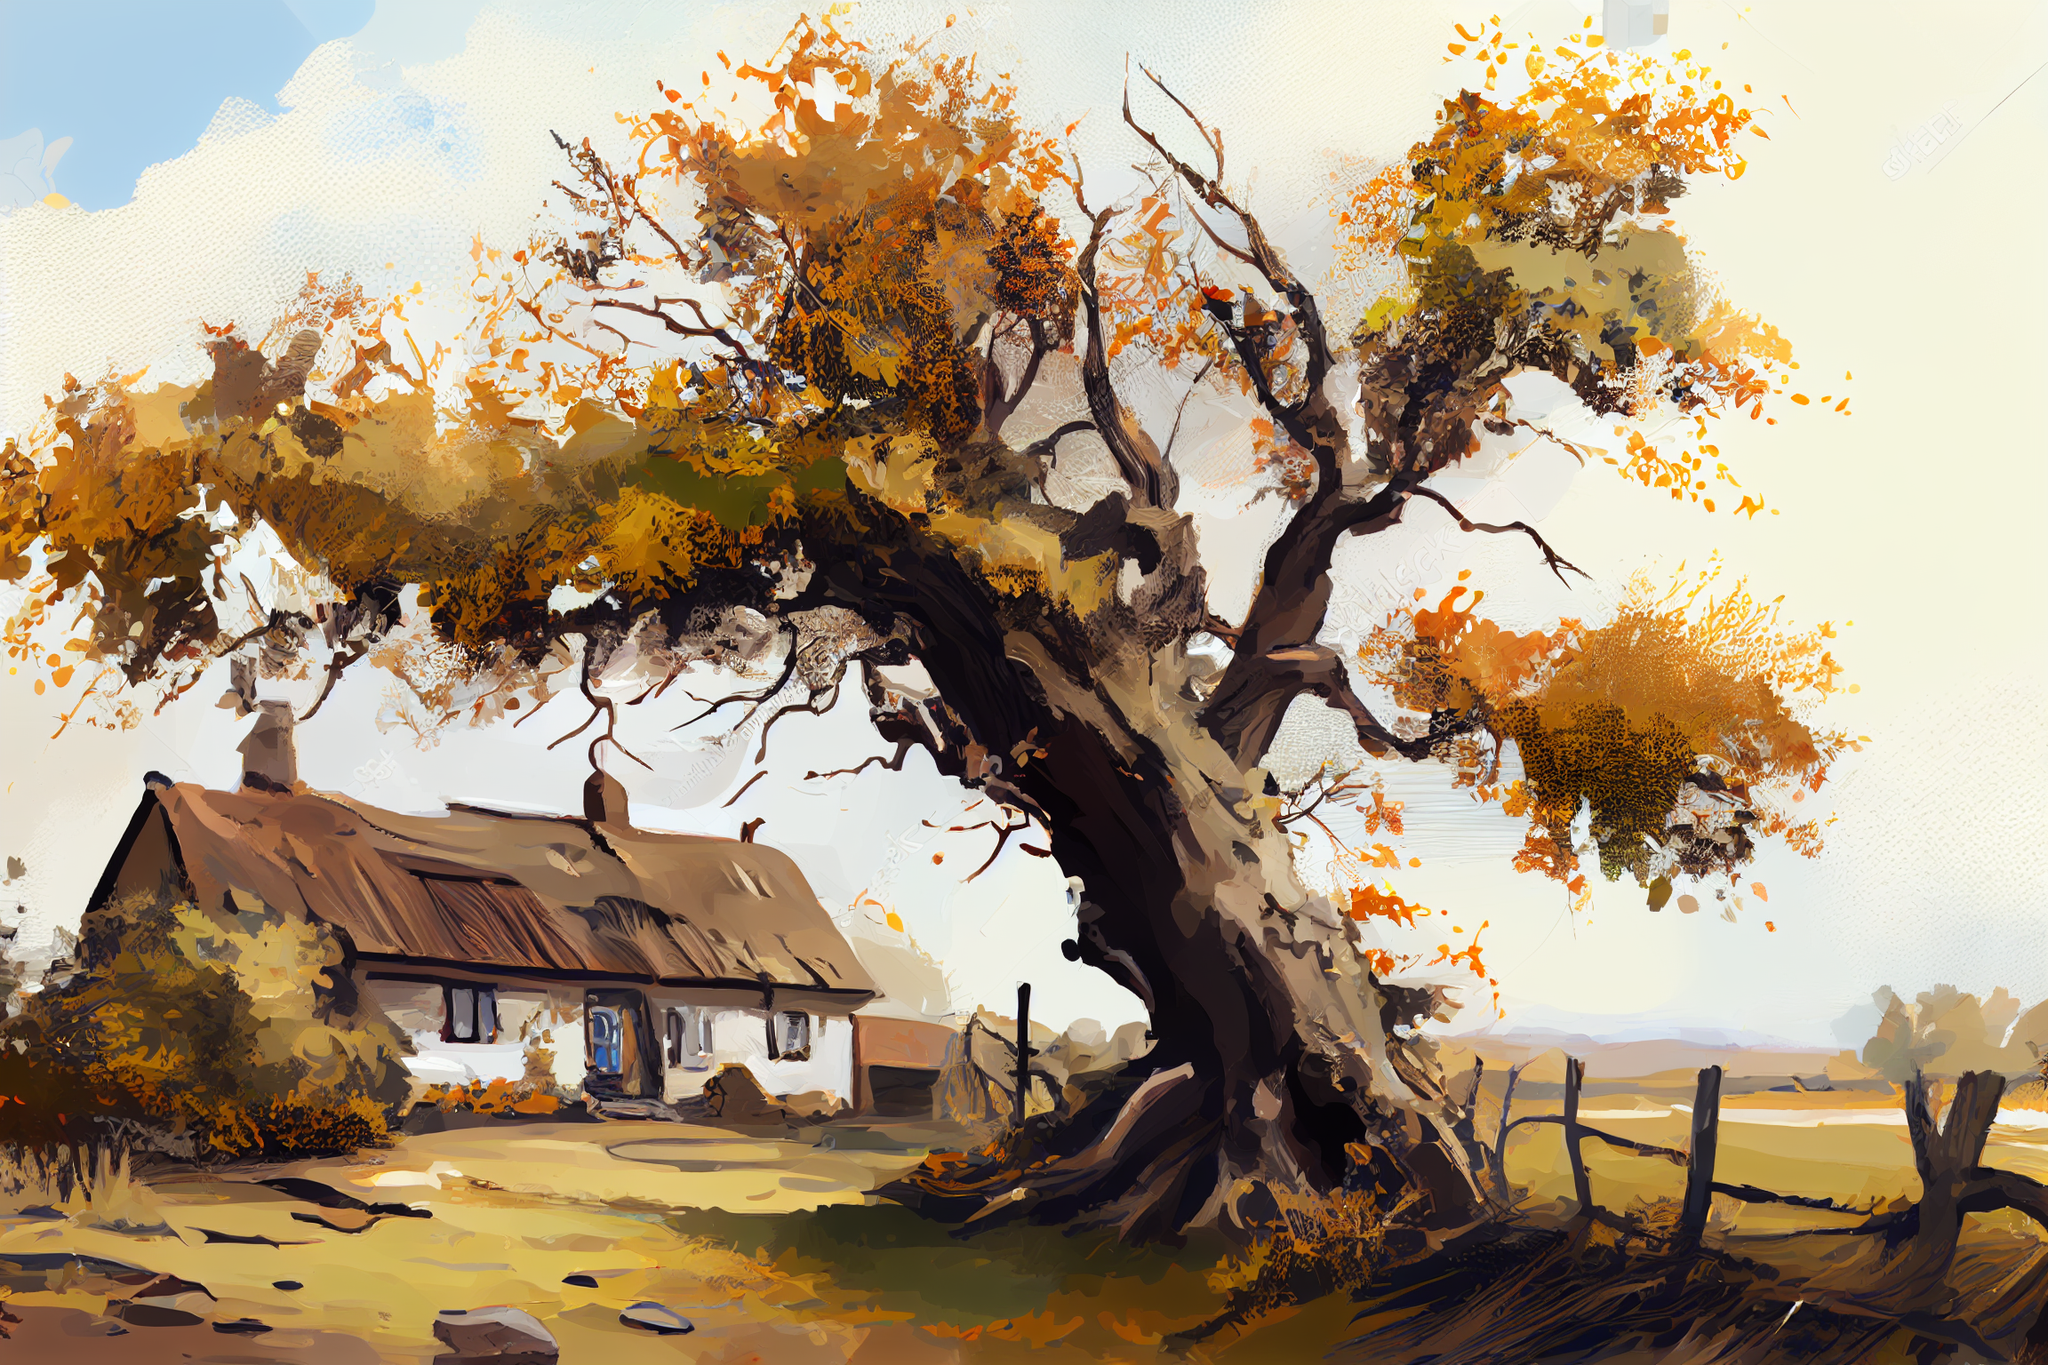 Autumn Windswept: A Captivating Oil Illustration of an Old Village Tree in the Breeze